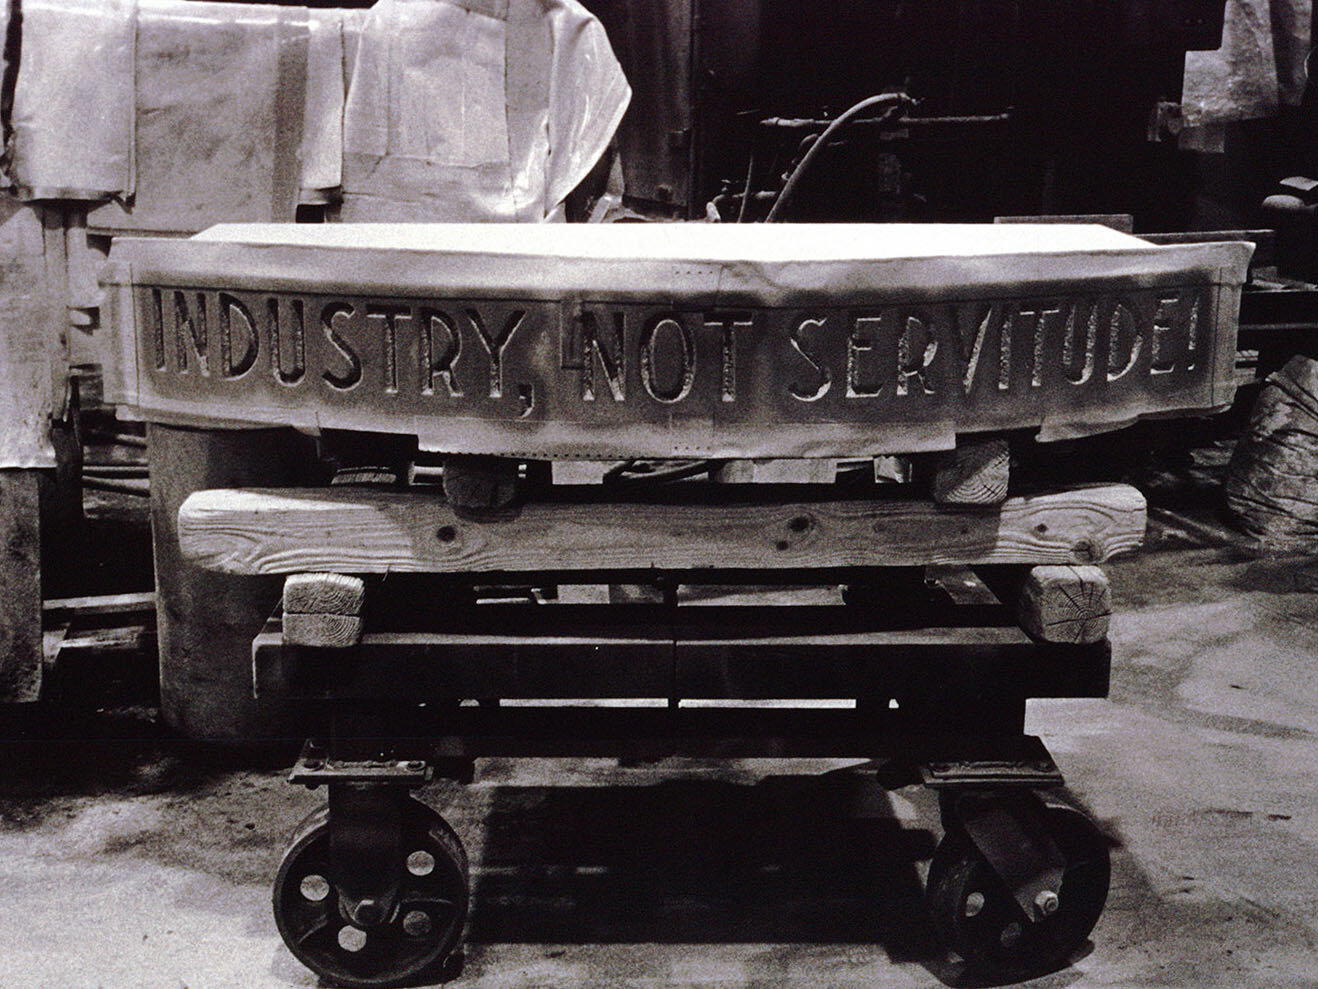  Industry Not Servitude!, National Historical Park for Labor and Industrial History, Lowell, Massachusetts, 1997 